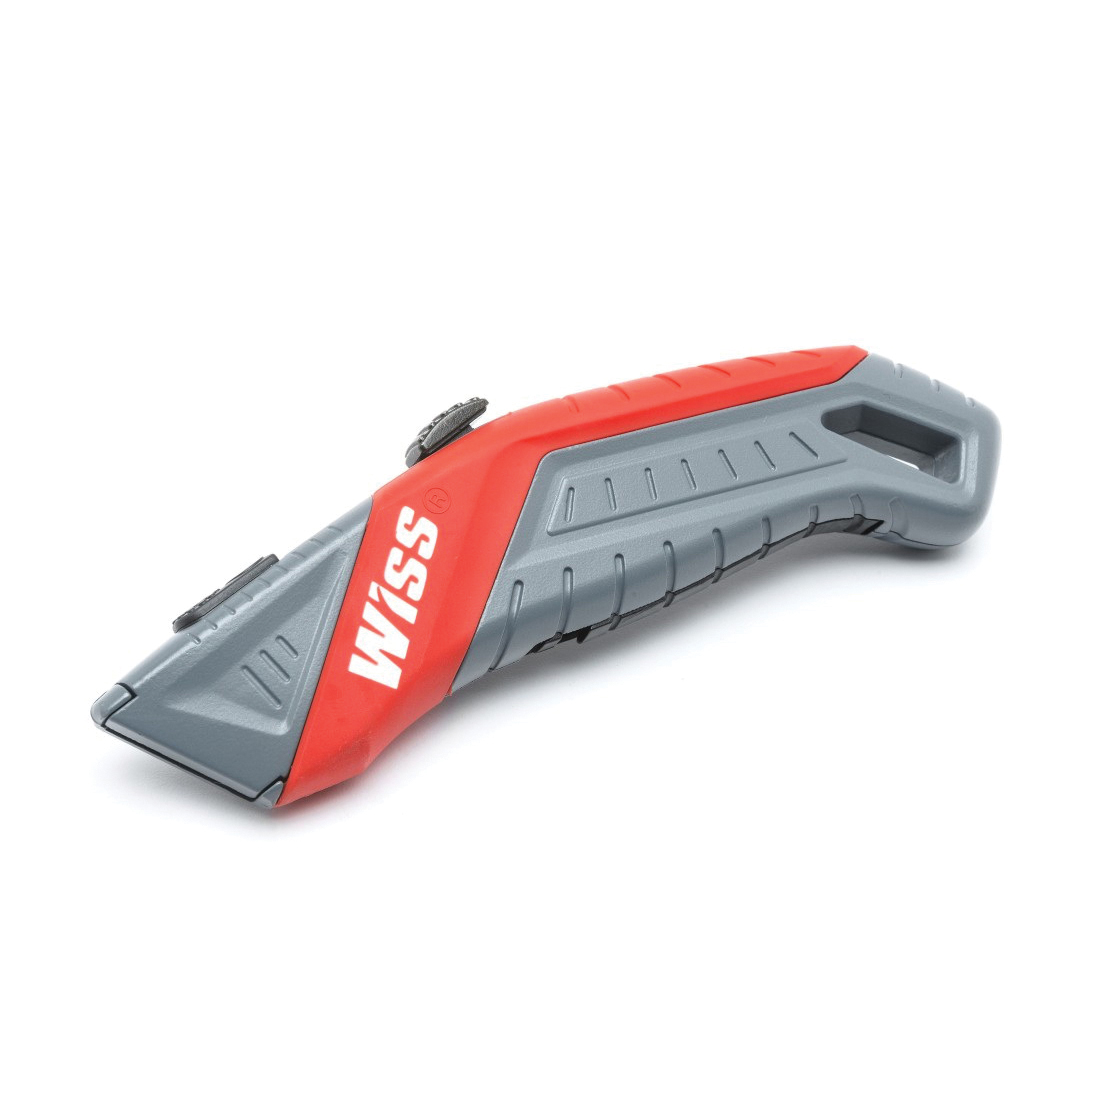 WISS AUTO RETRACT SAFETY UTILITY KNIFE